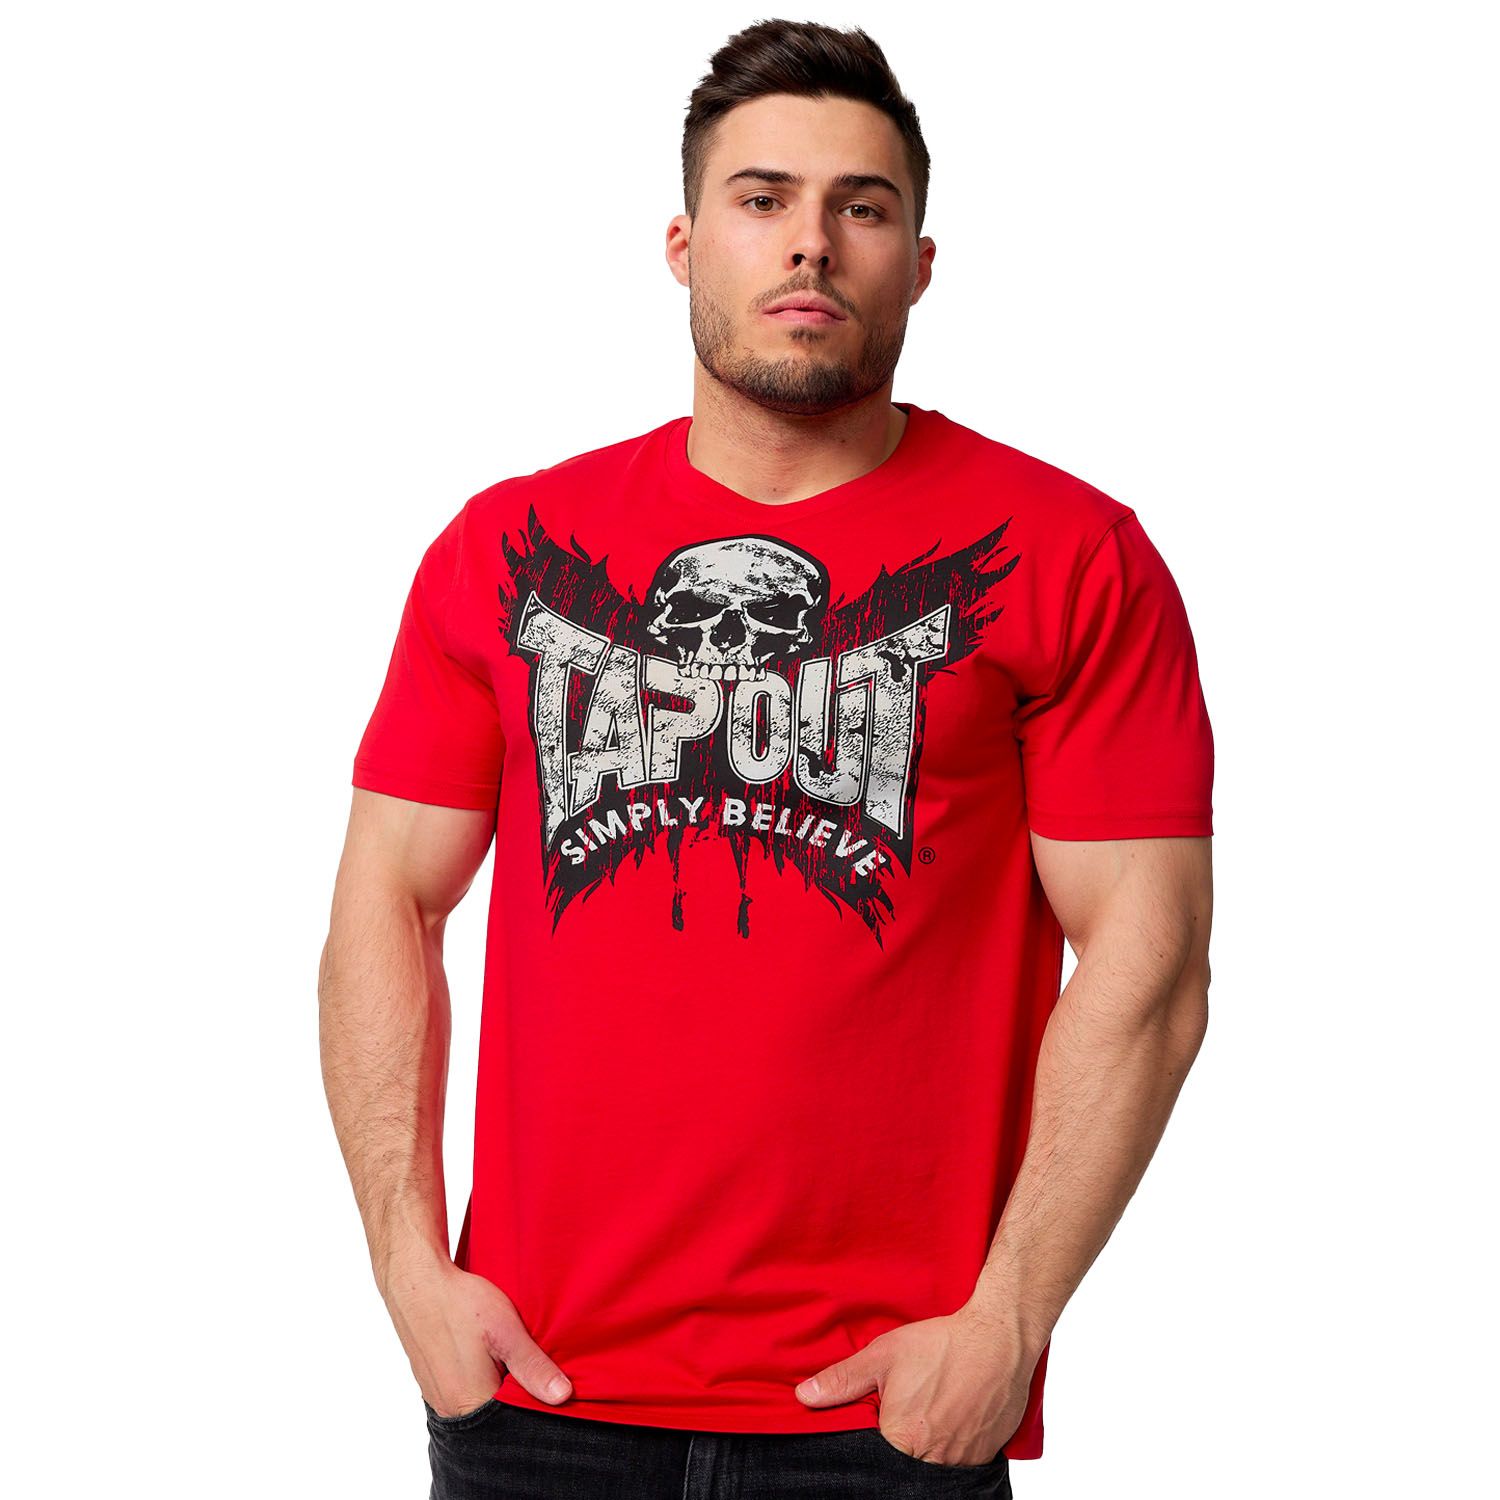 Tapout T-Shirt, Creston, red, XXL